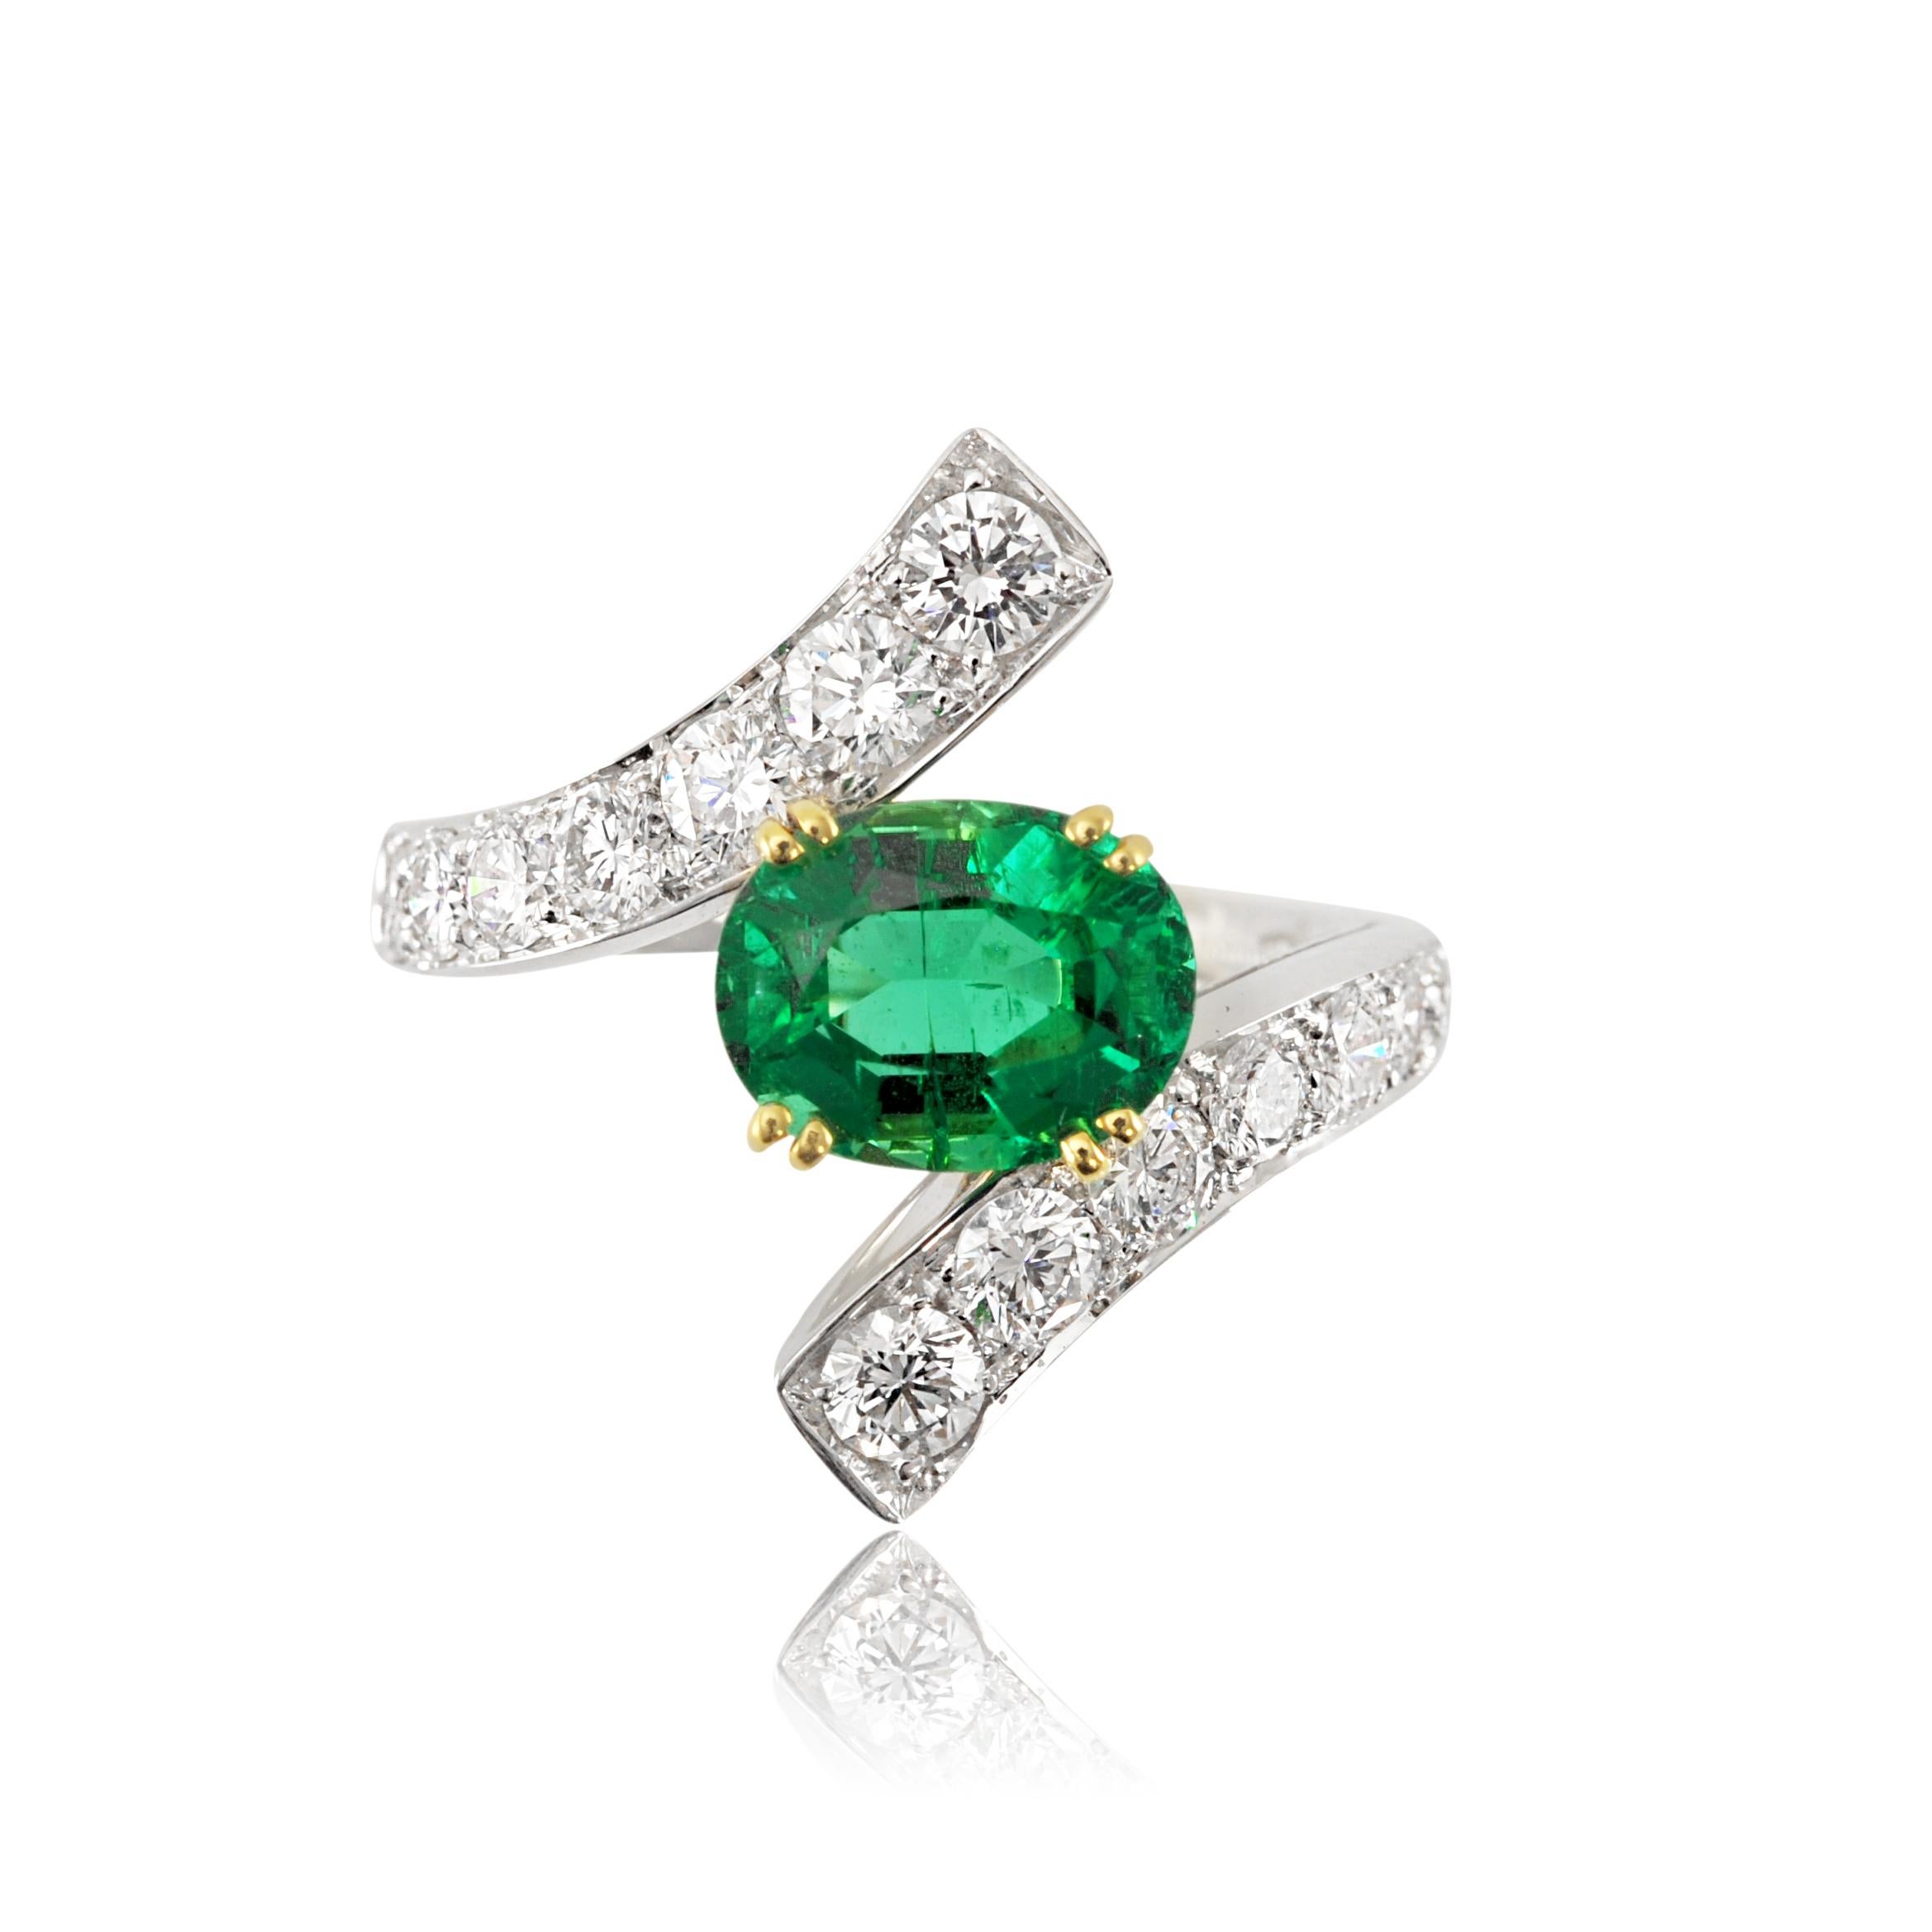 Women's Picchiotti 18 Karat White and Yellow Gold Fashion Ring with Diamonds and Emerald For Sale